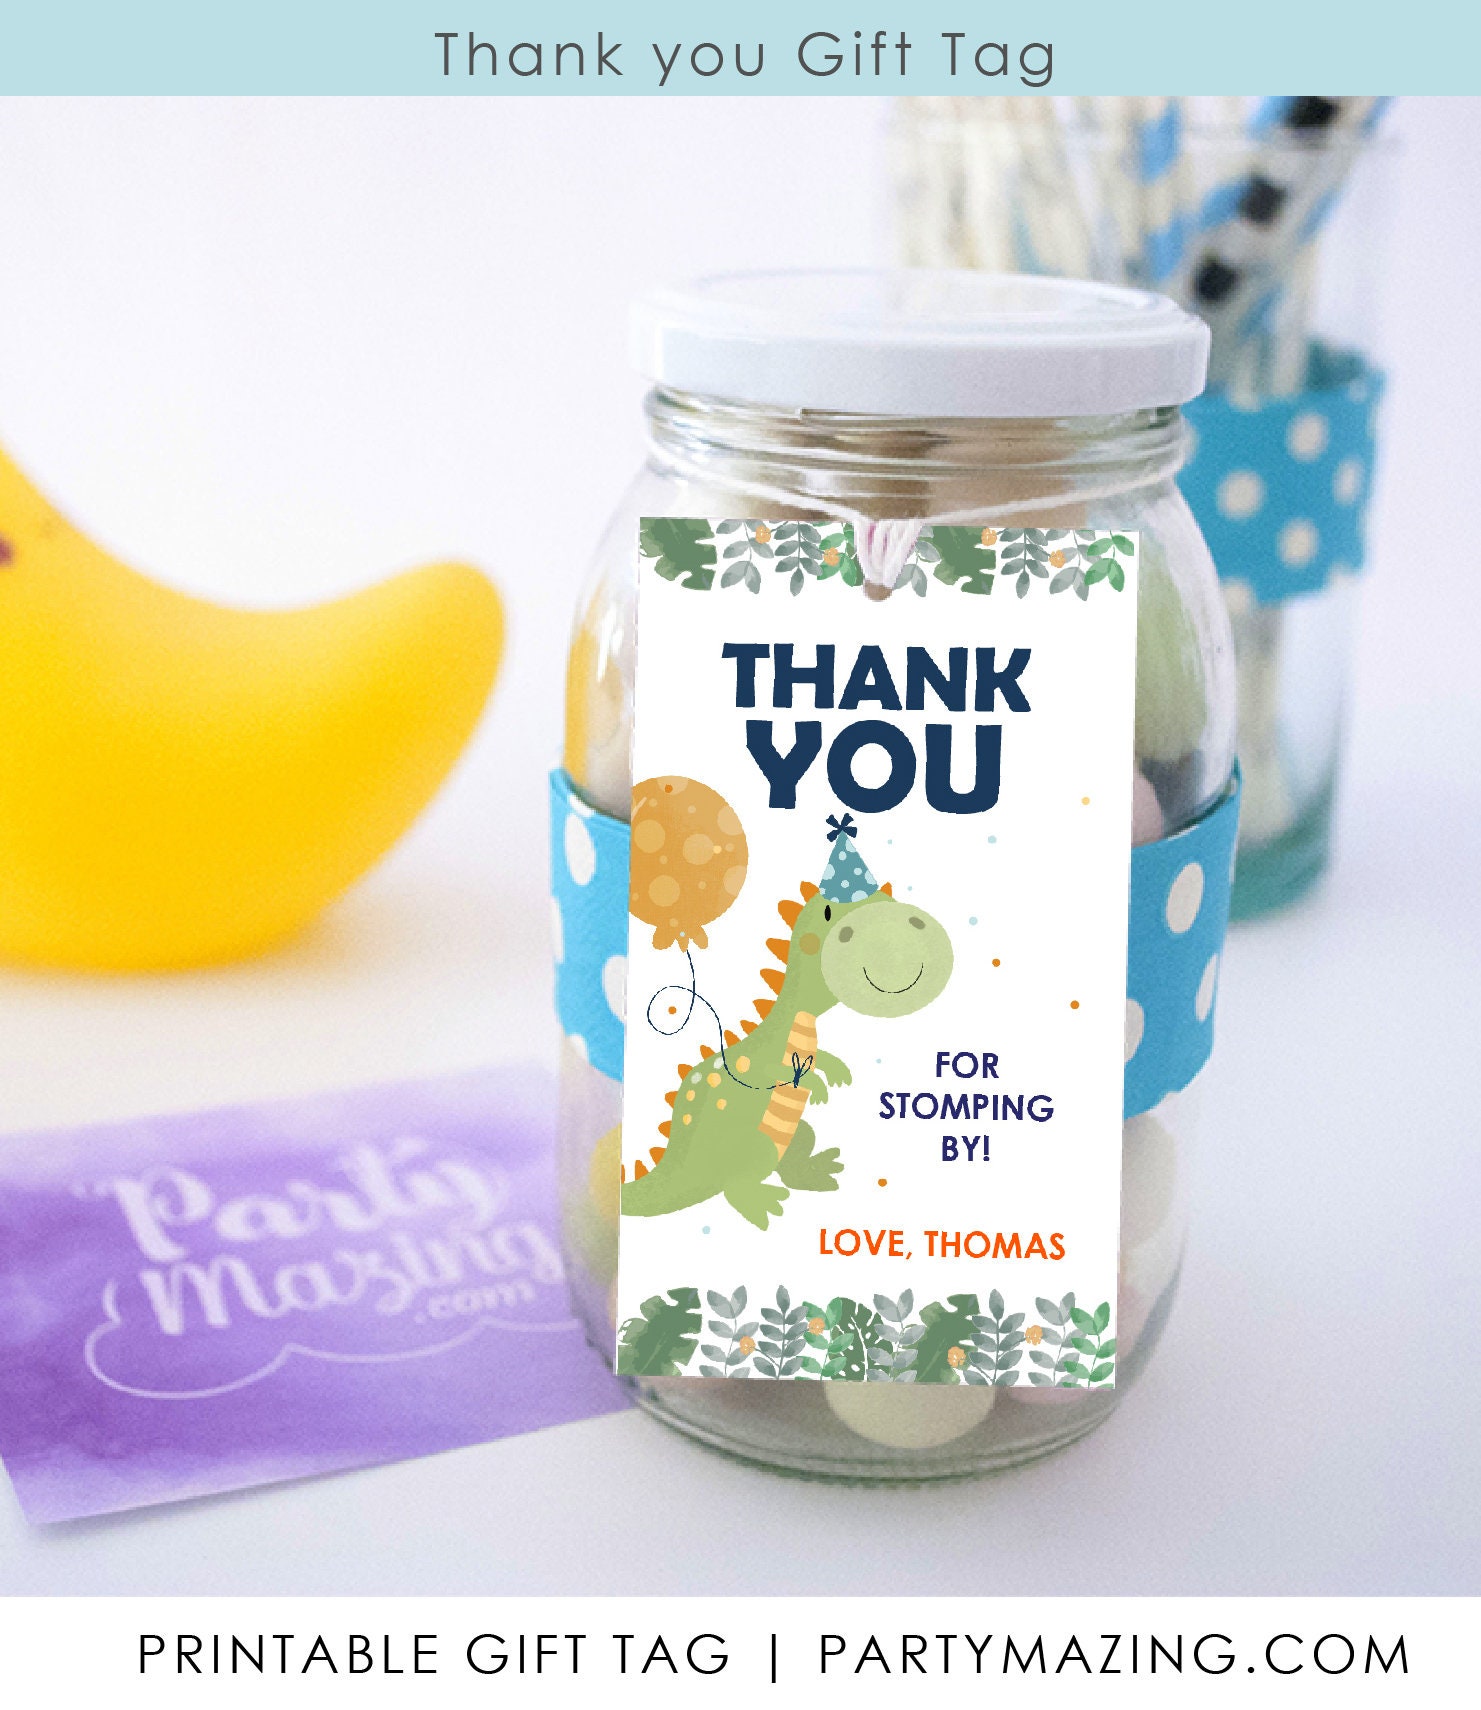 Dinosaur Party Favor Tags Template, Printable Dino Thank You Tags